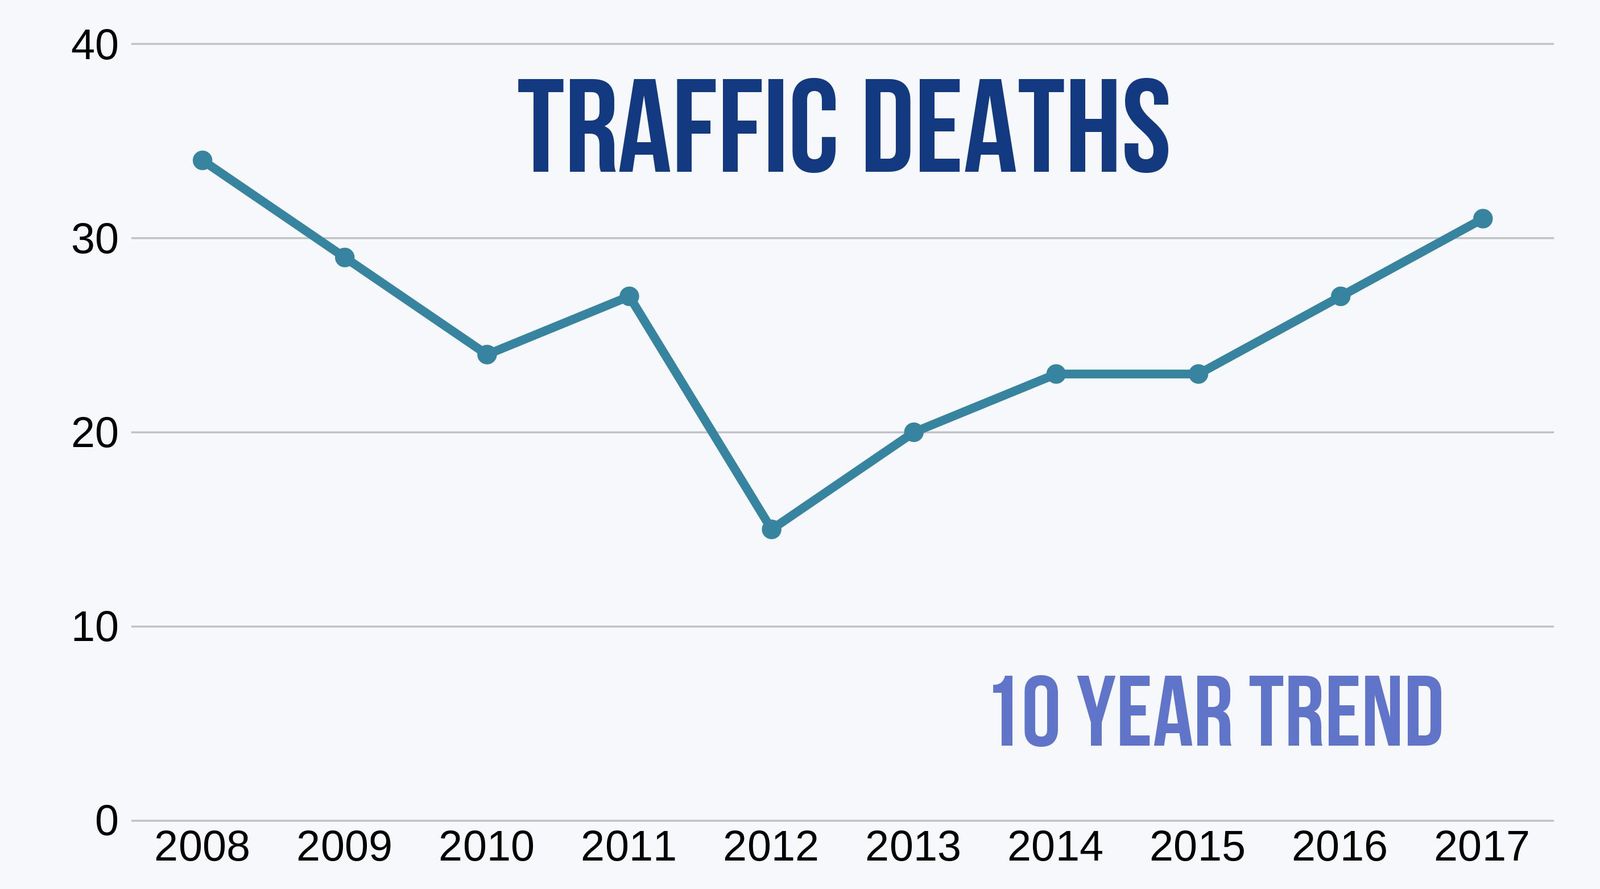 10 Year trend for traffic deaths in DC